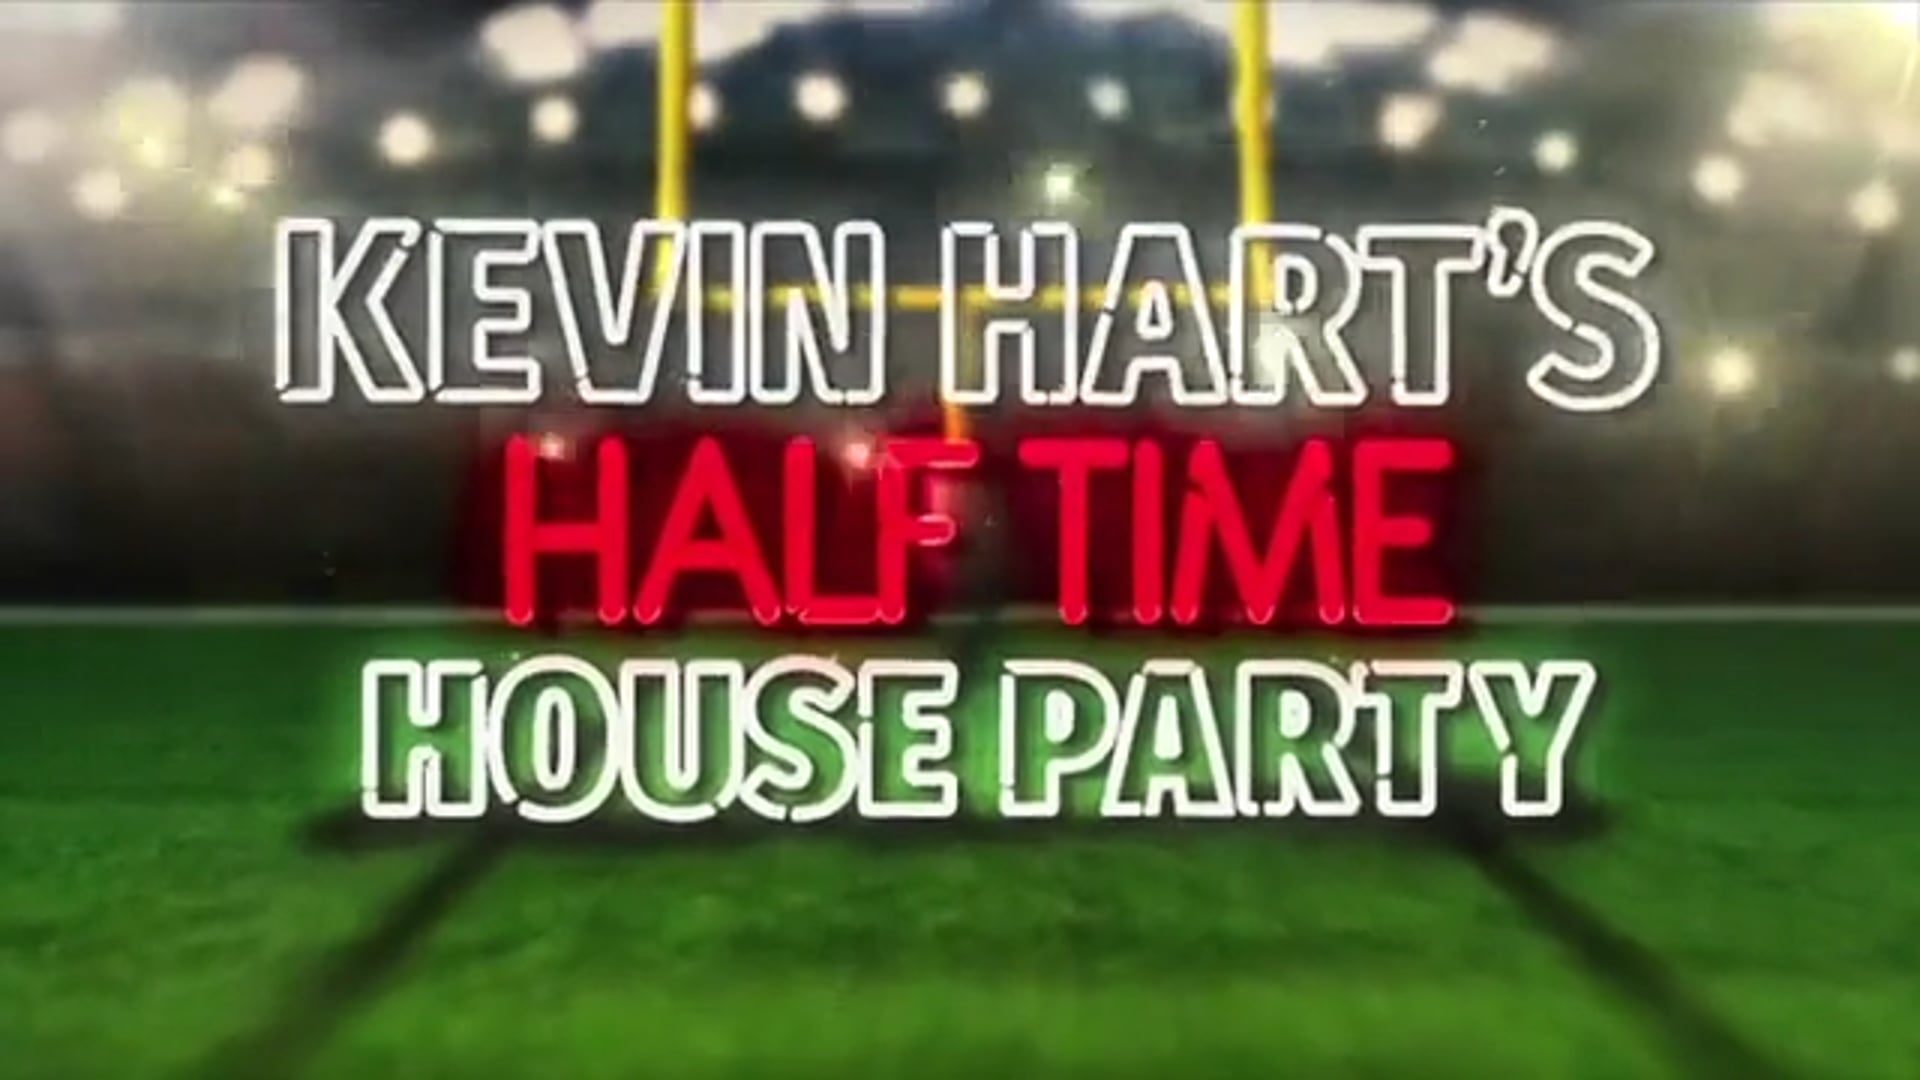 Kevin Hart's 'Halftime House Party' -  2/7/2016